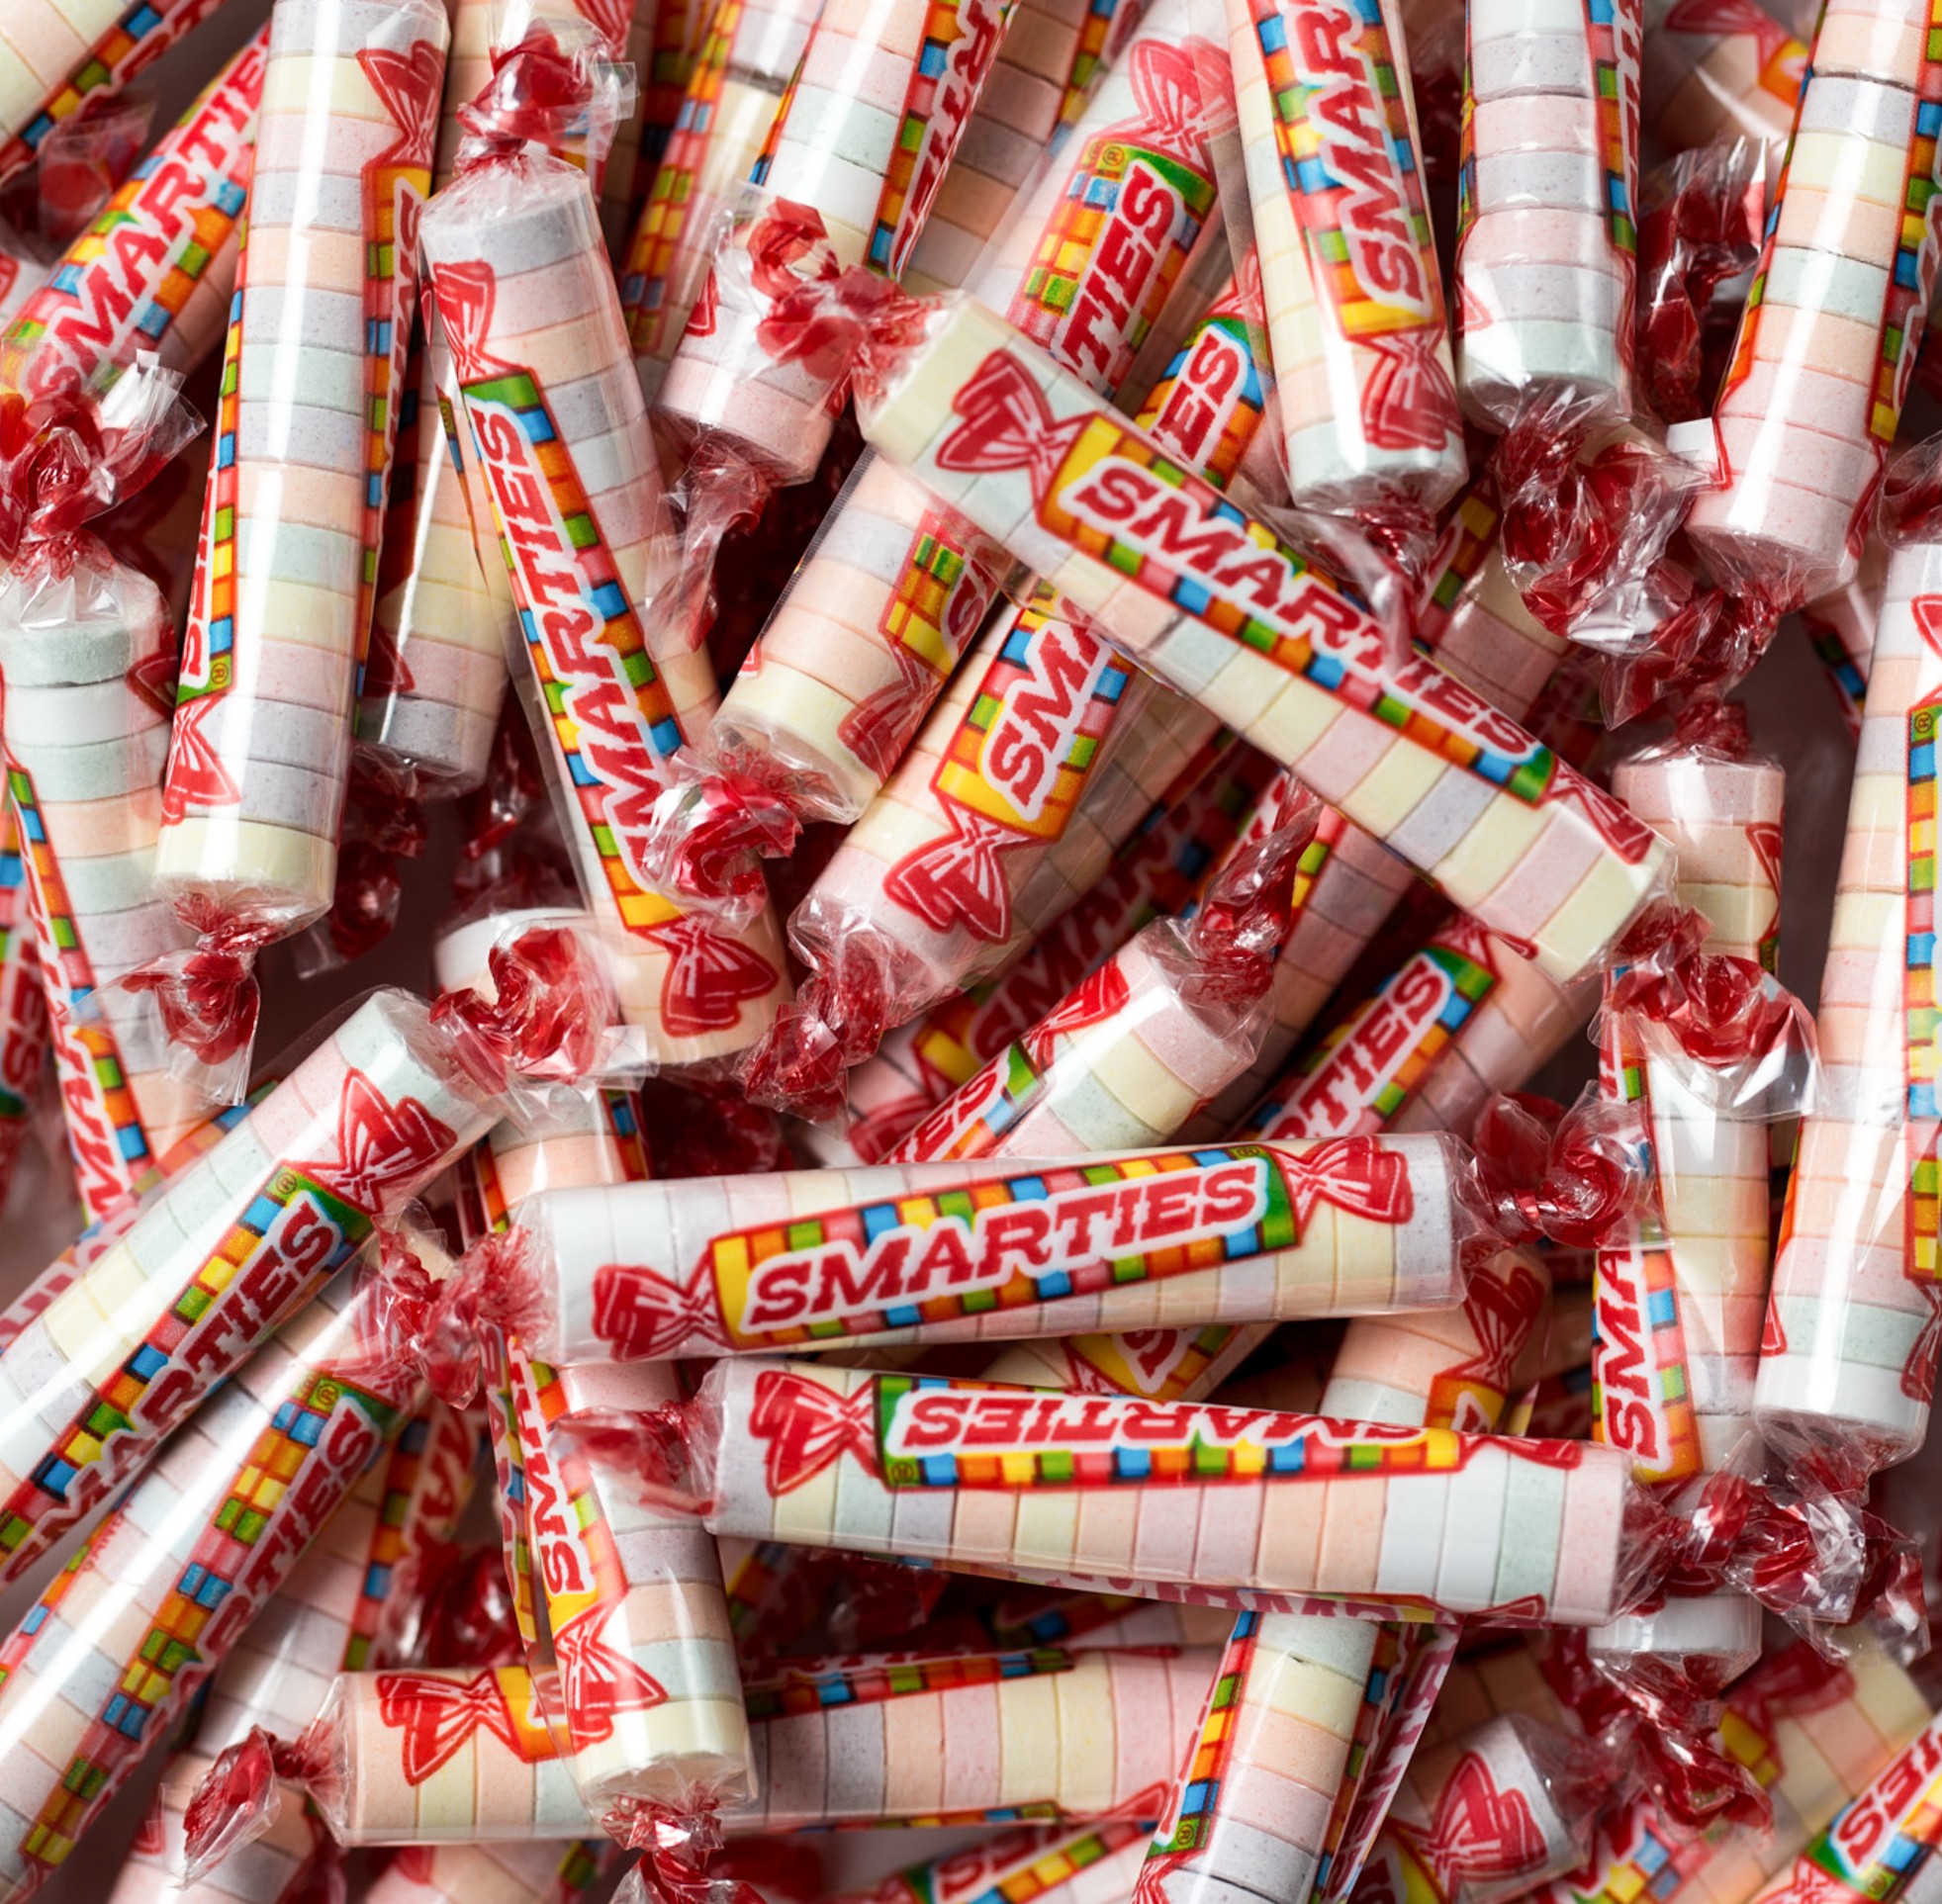 The Ingredients that Make Smarties so Smart